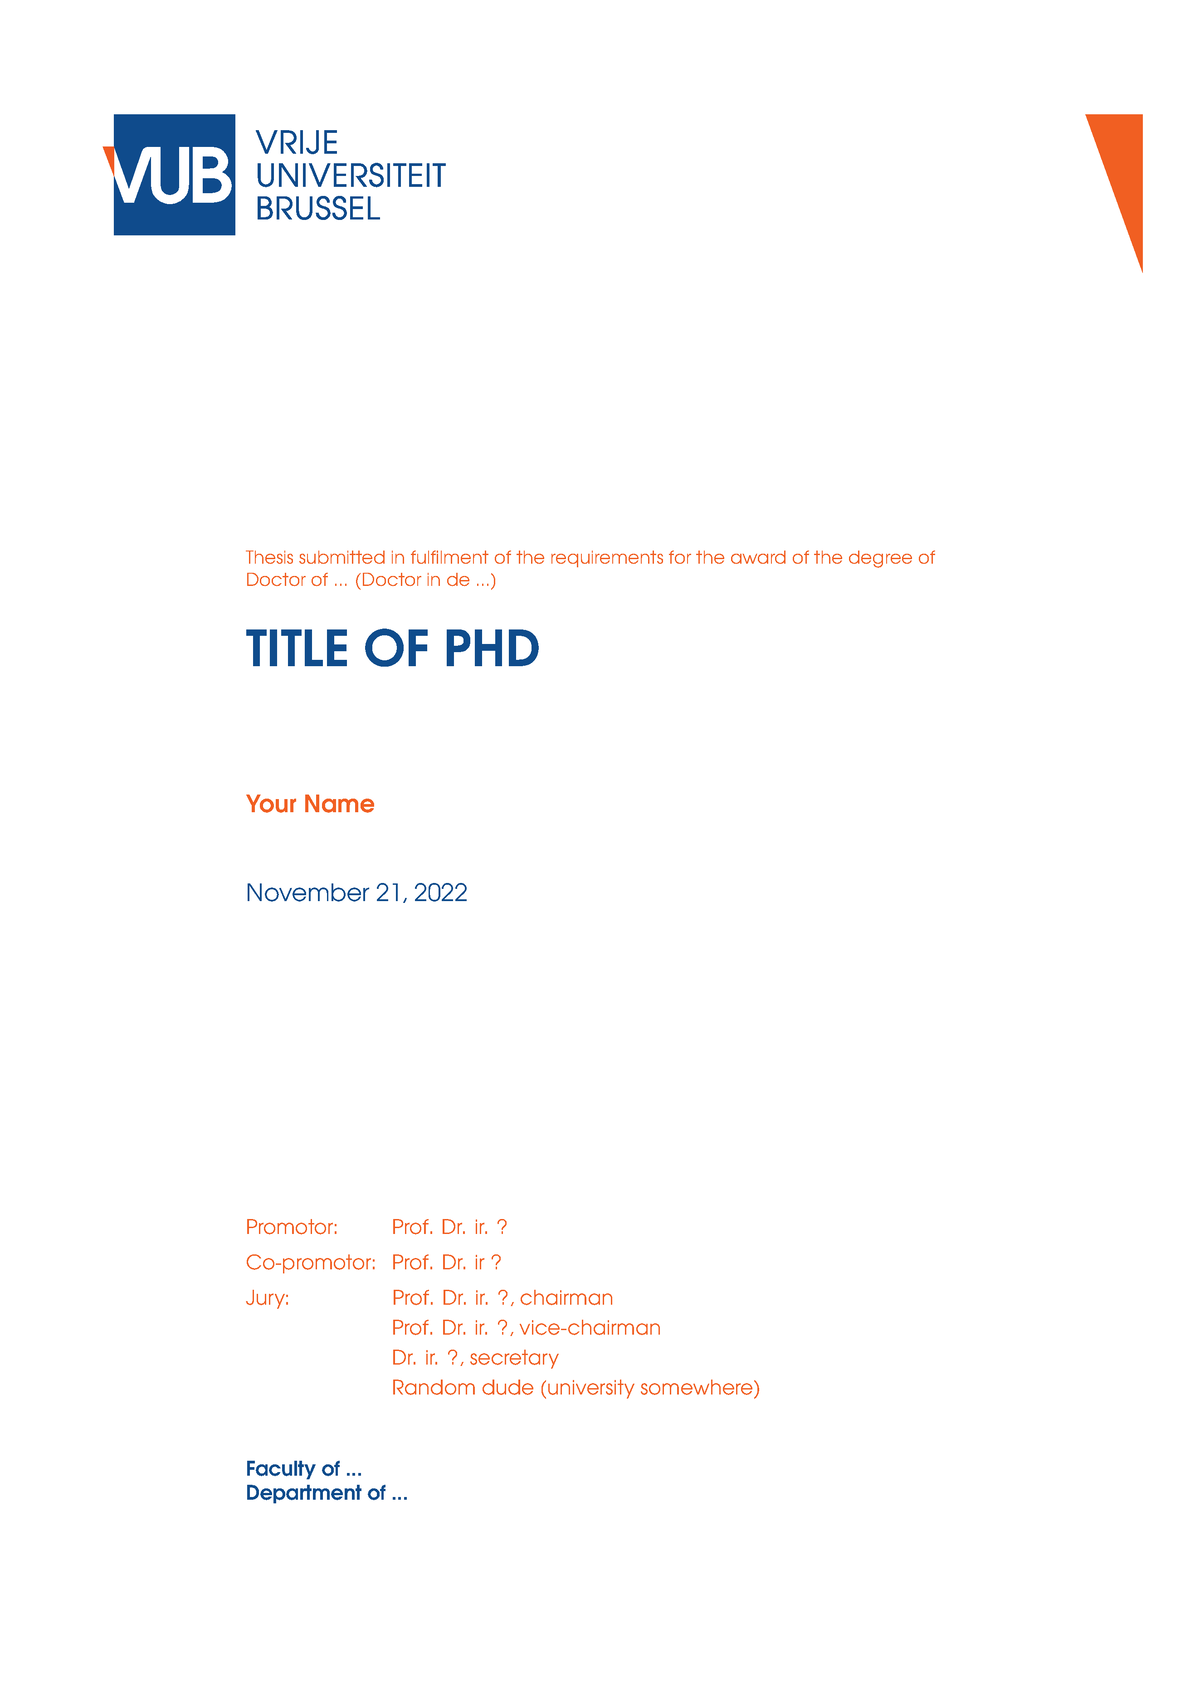 vub master thesis guidelines